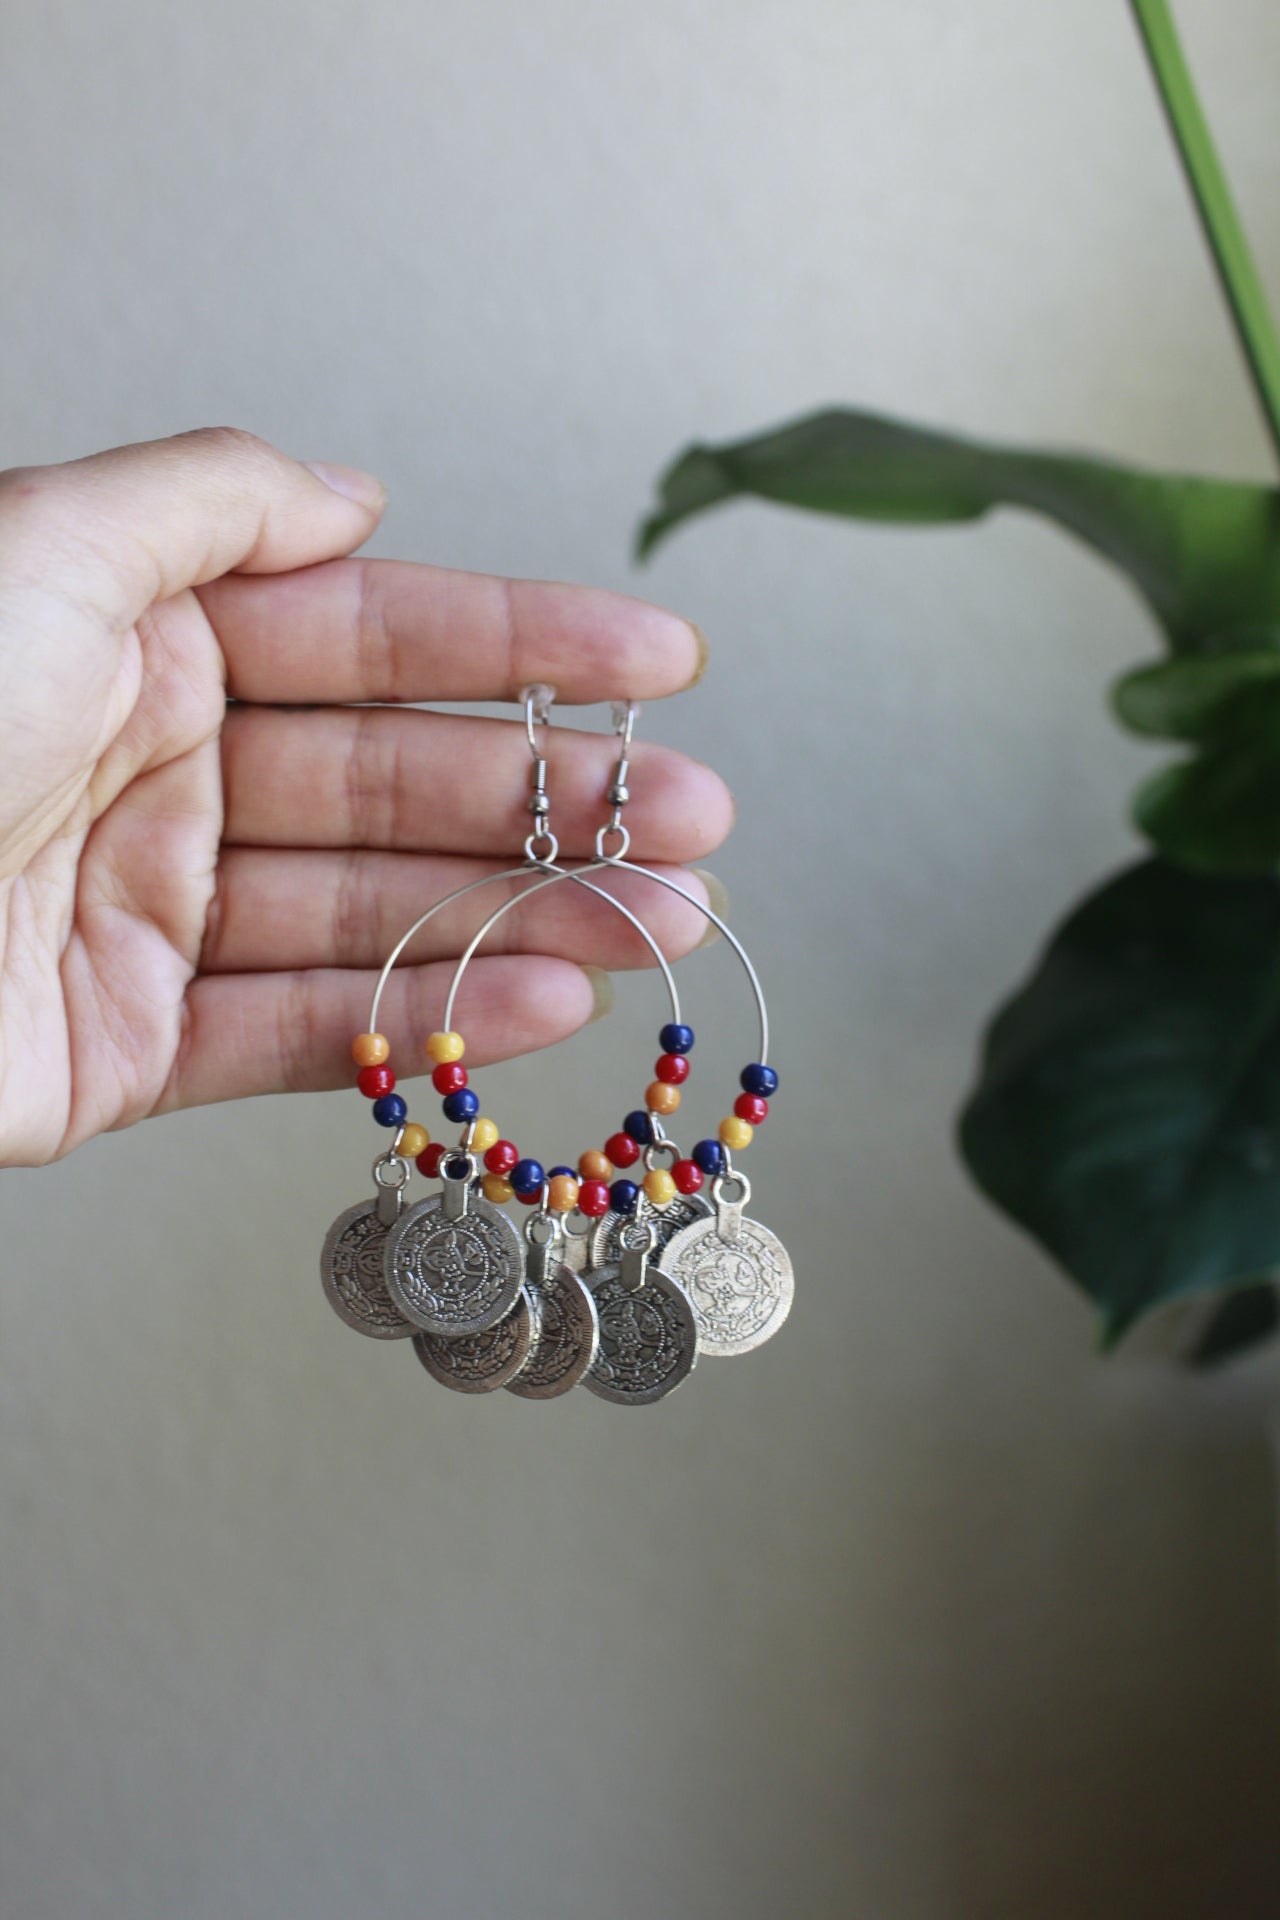 festive earrings - with the trees